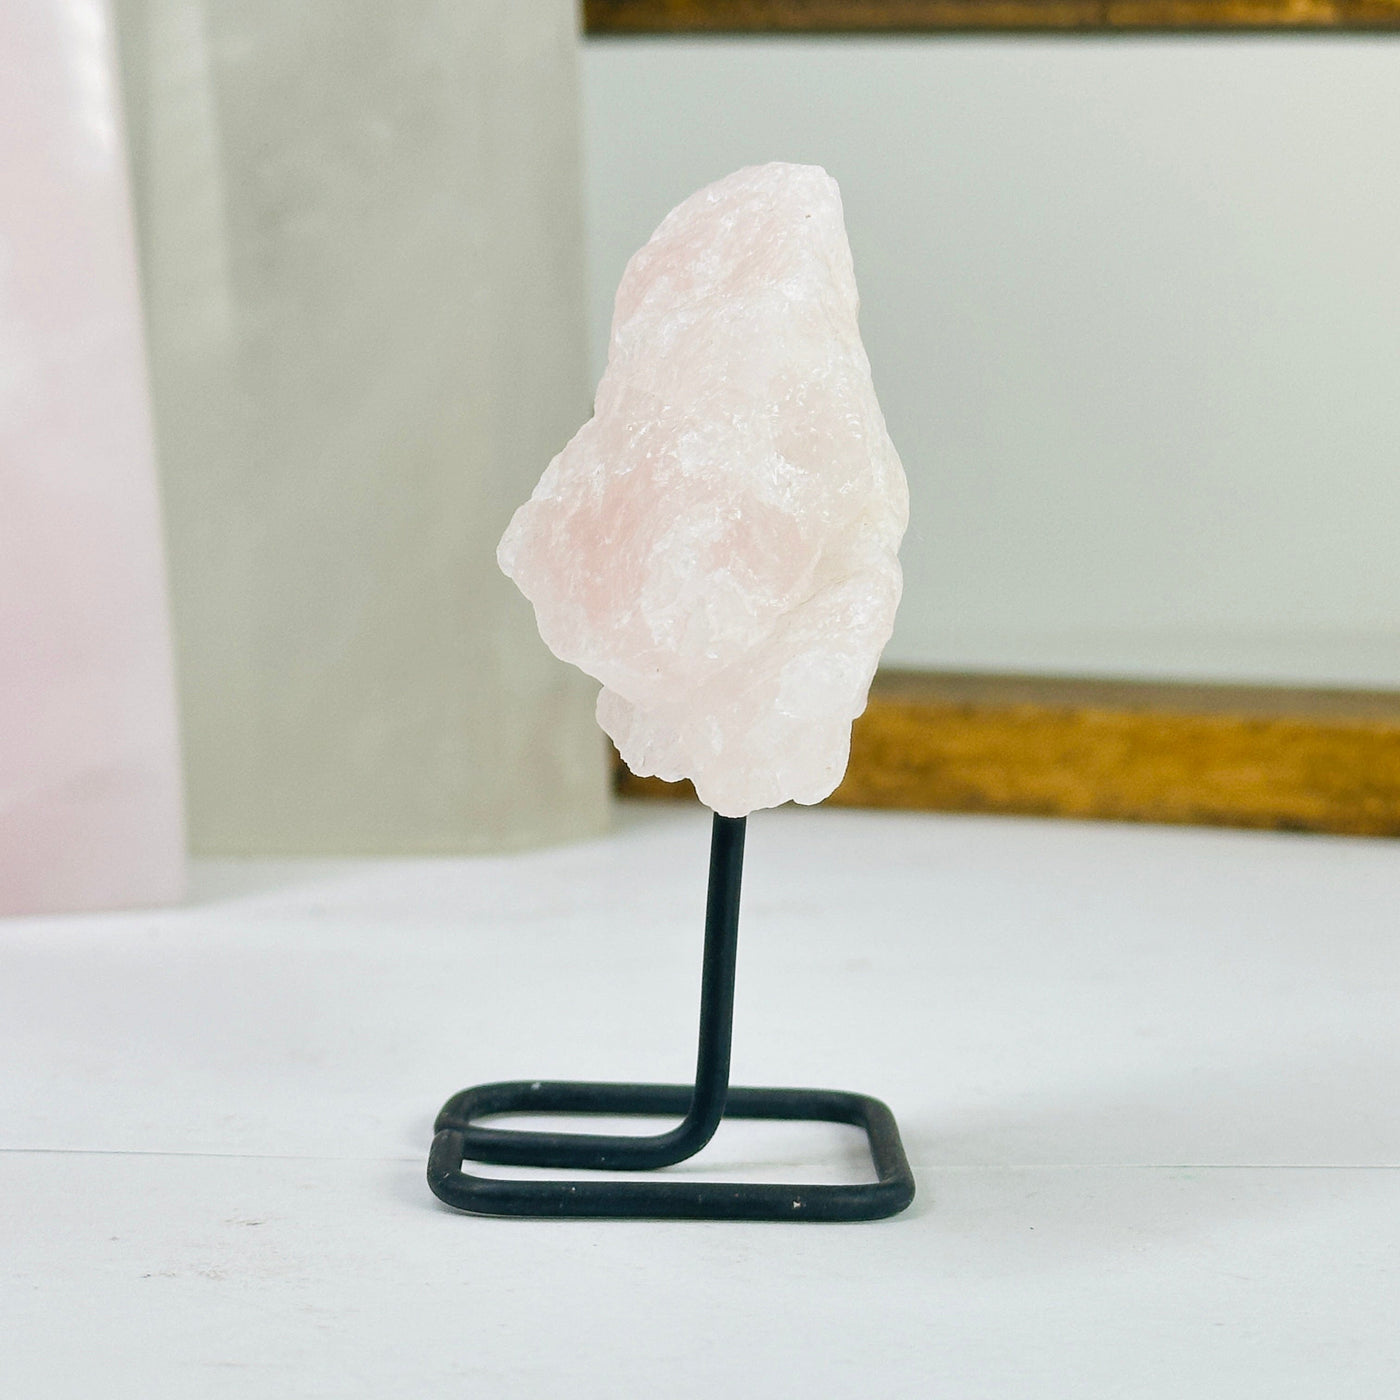 Rose quartz on metal stand with decorations in the background